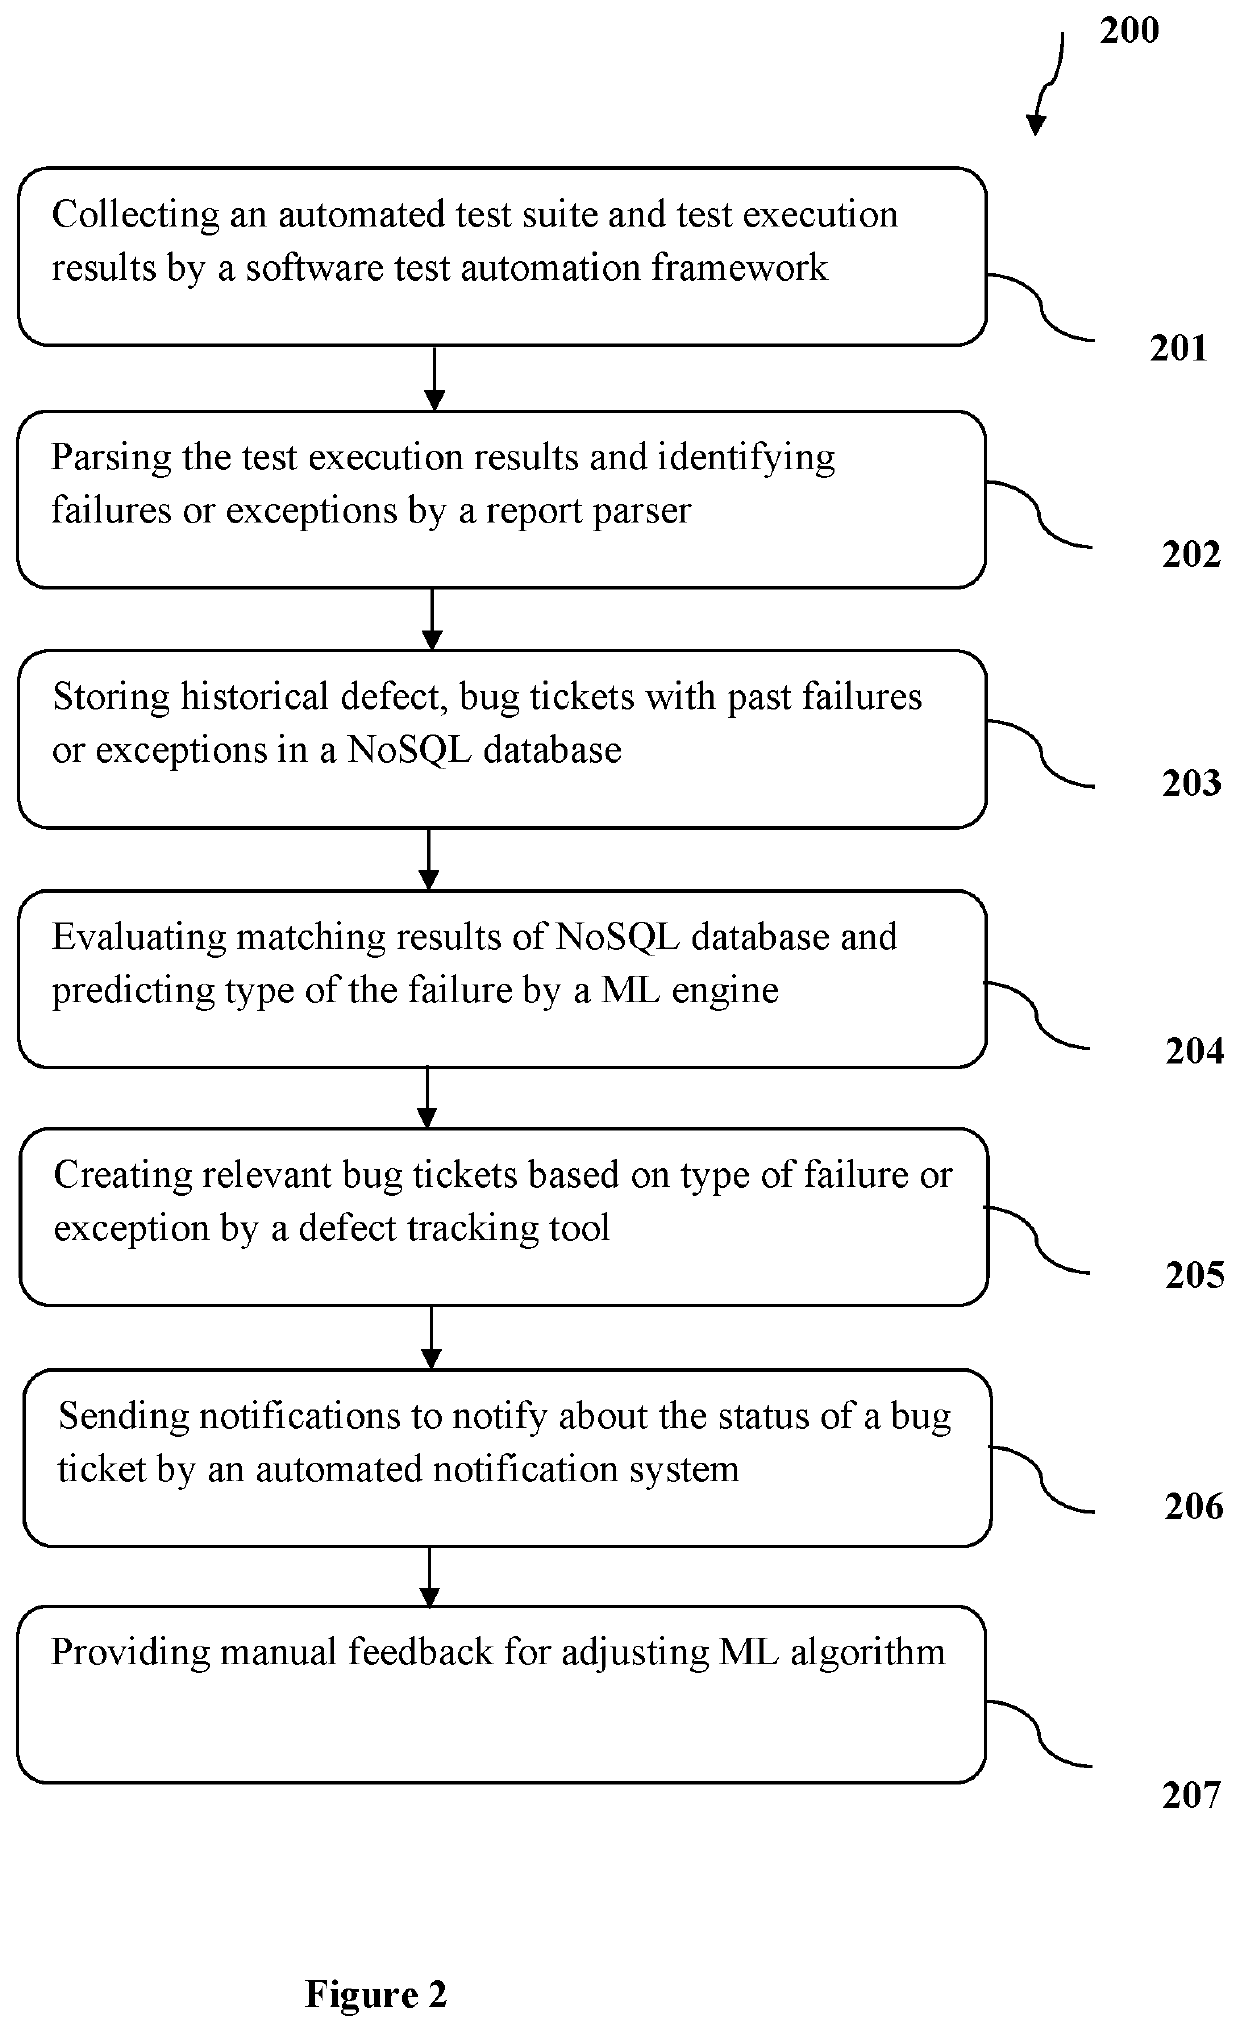 System and method for automated software testing based on machine learning (ML)